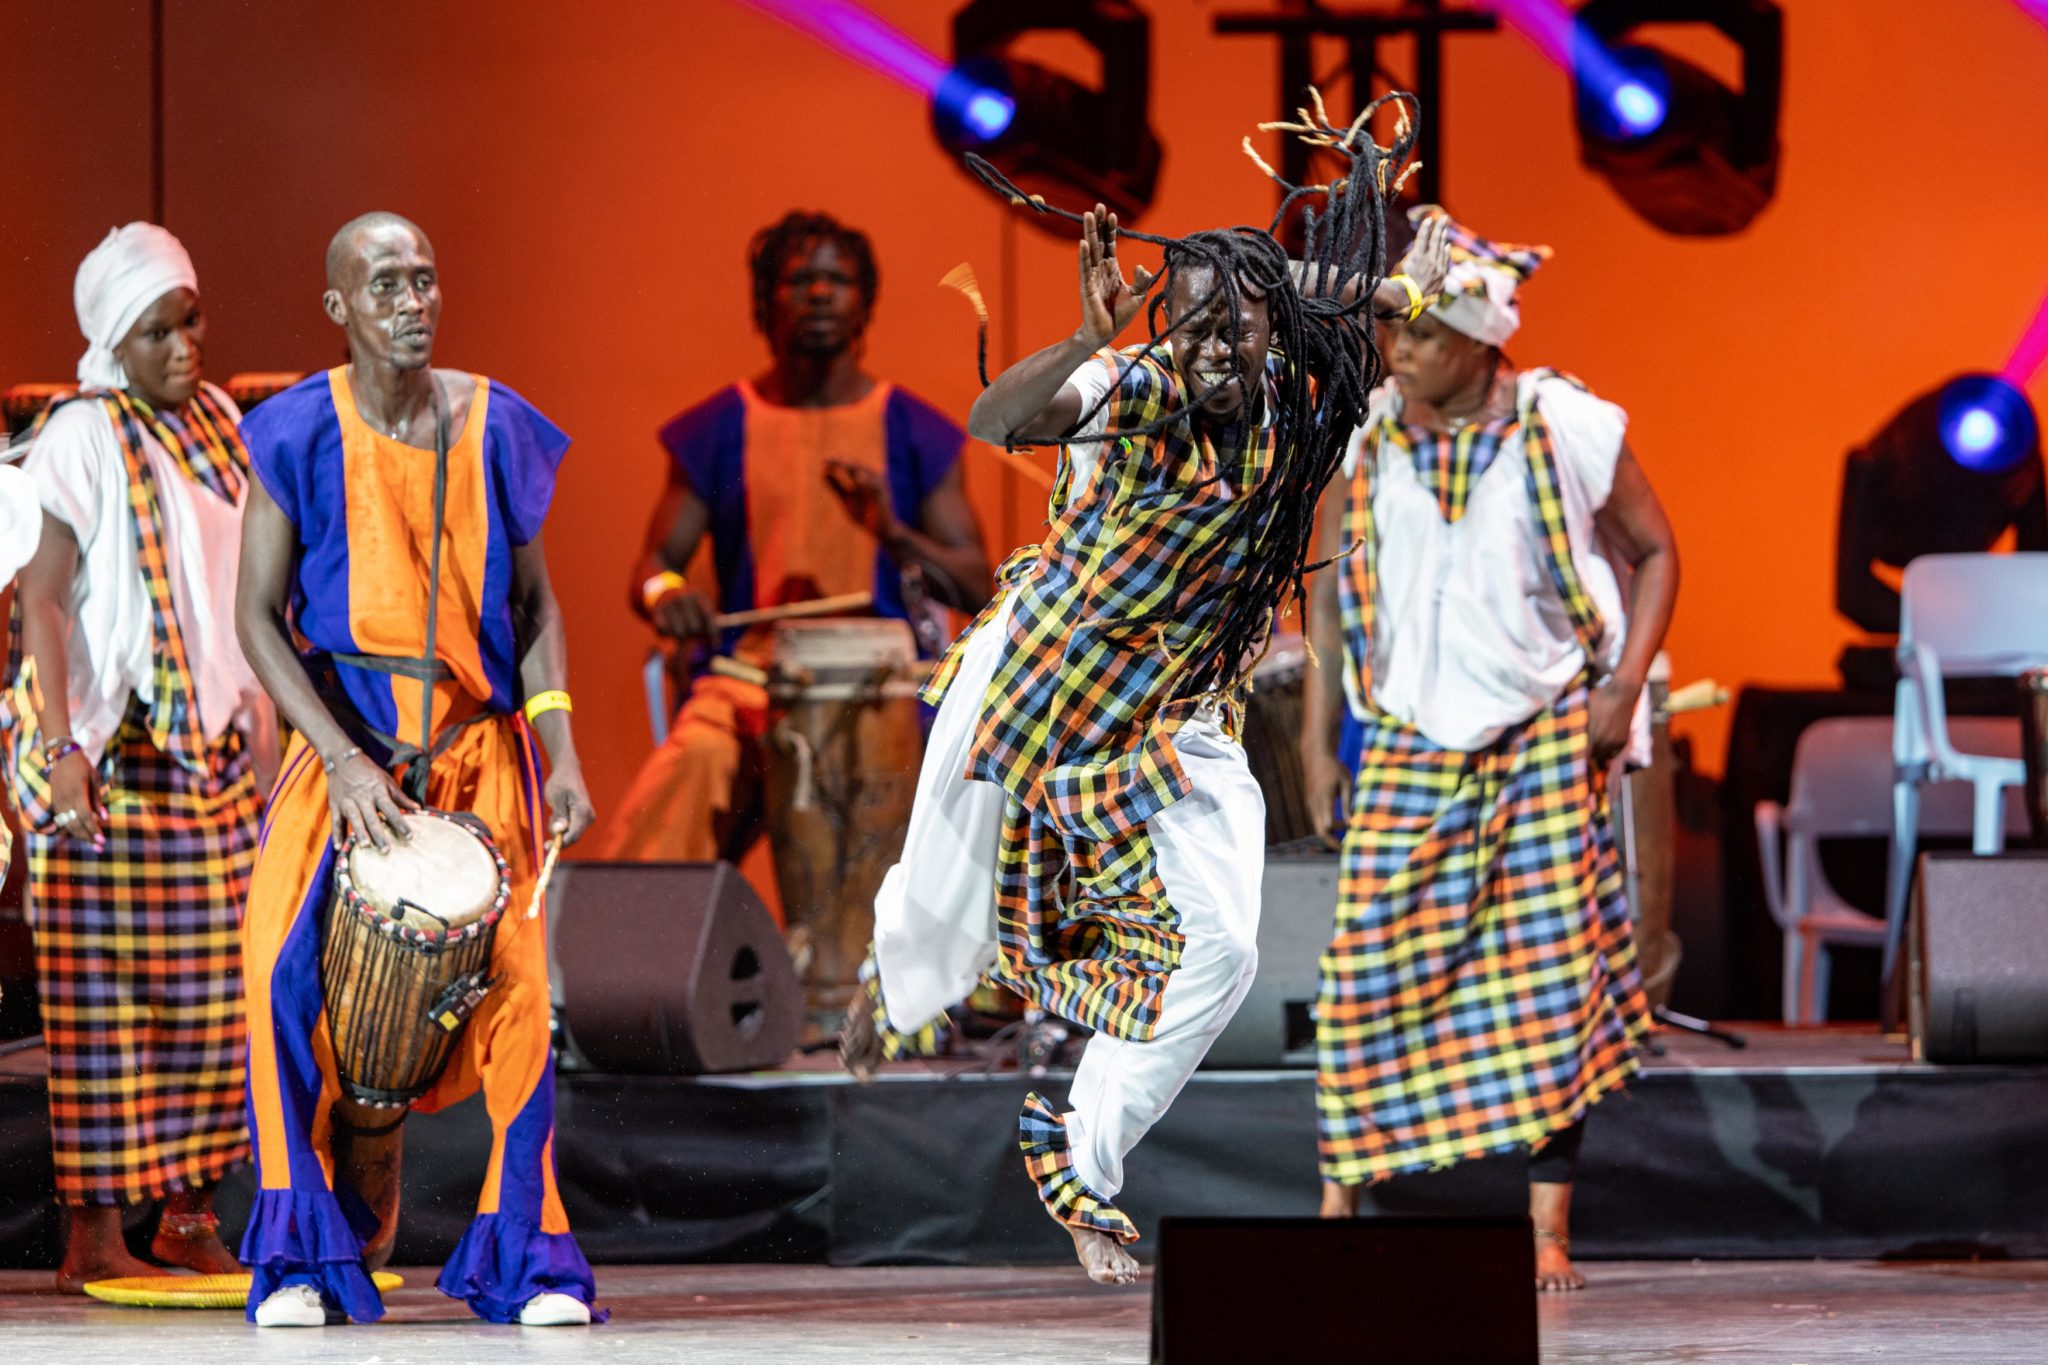 Dance performers, drums, chairs, stage, men and women wearing colorful checkered clothing